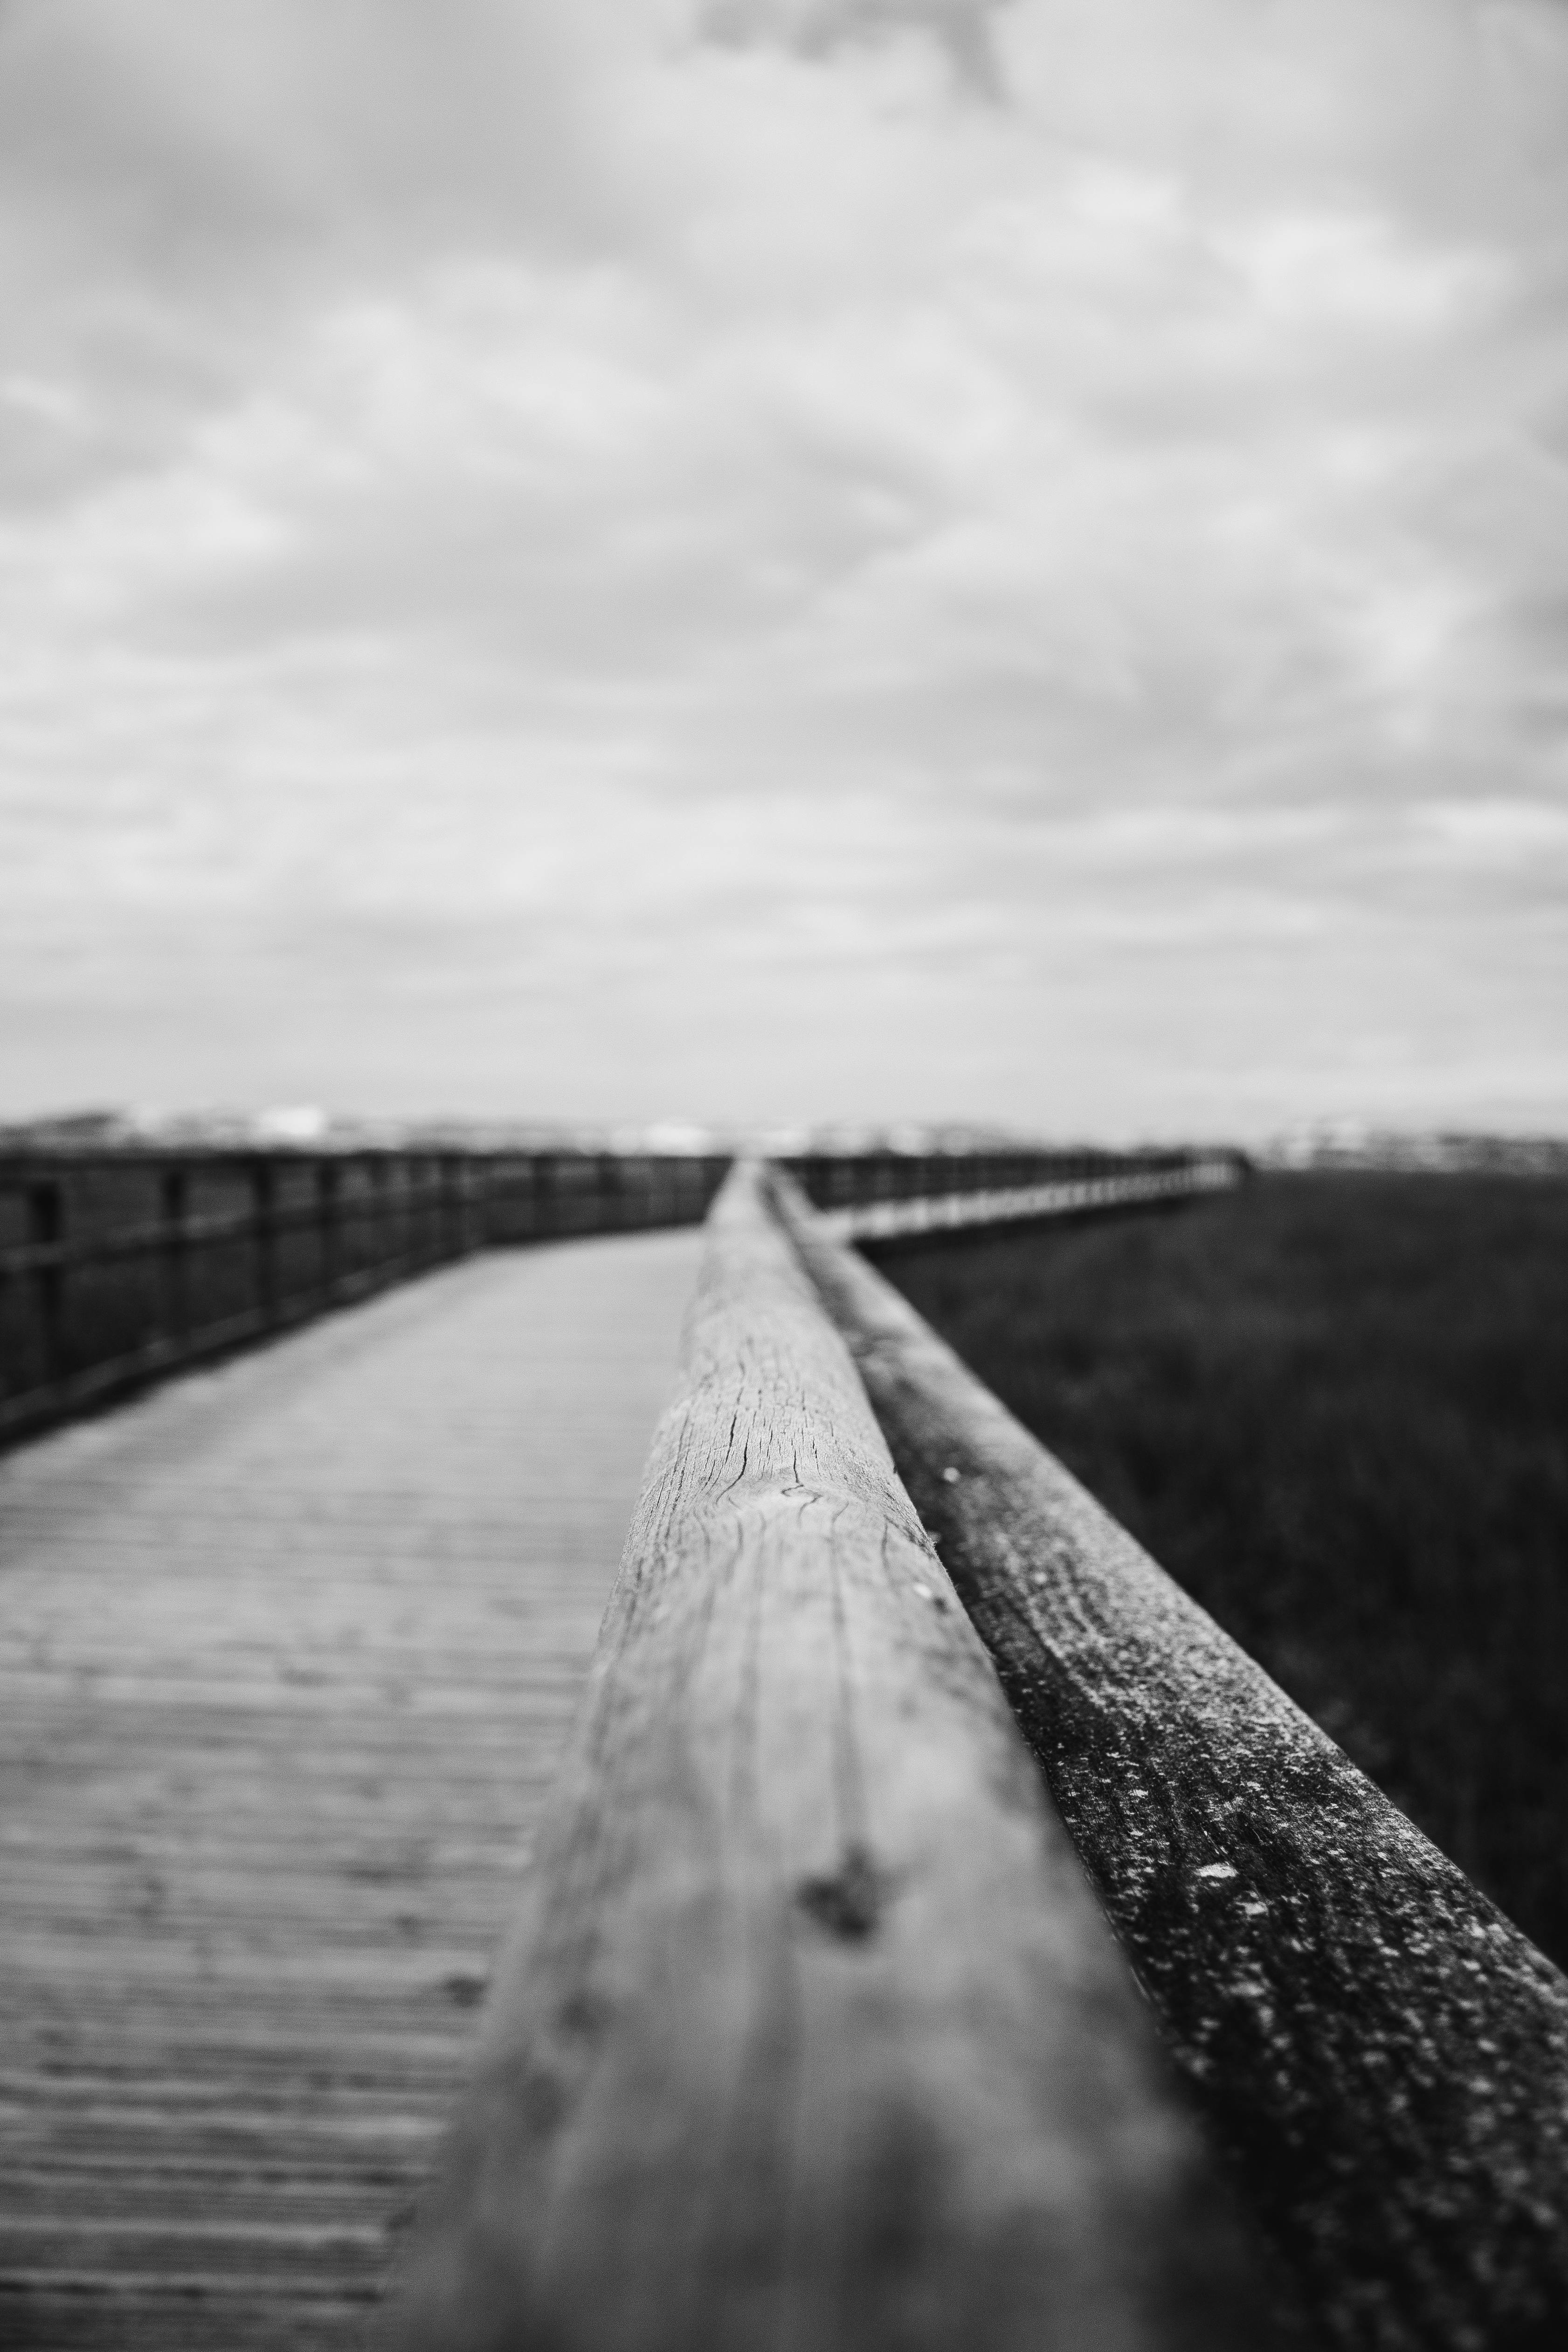 grayscale photography of a wooden bridge